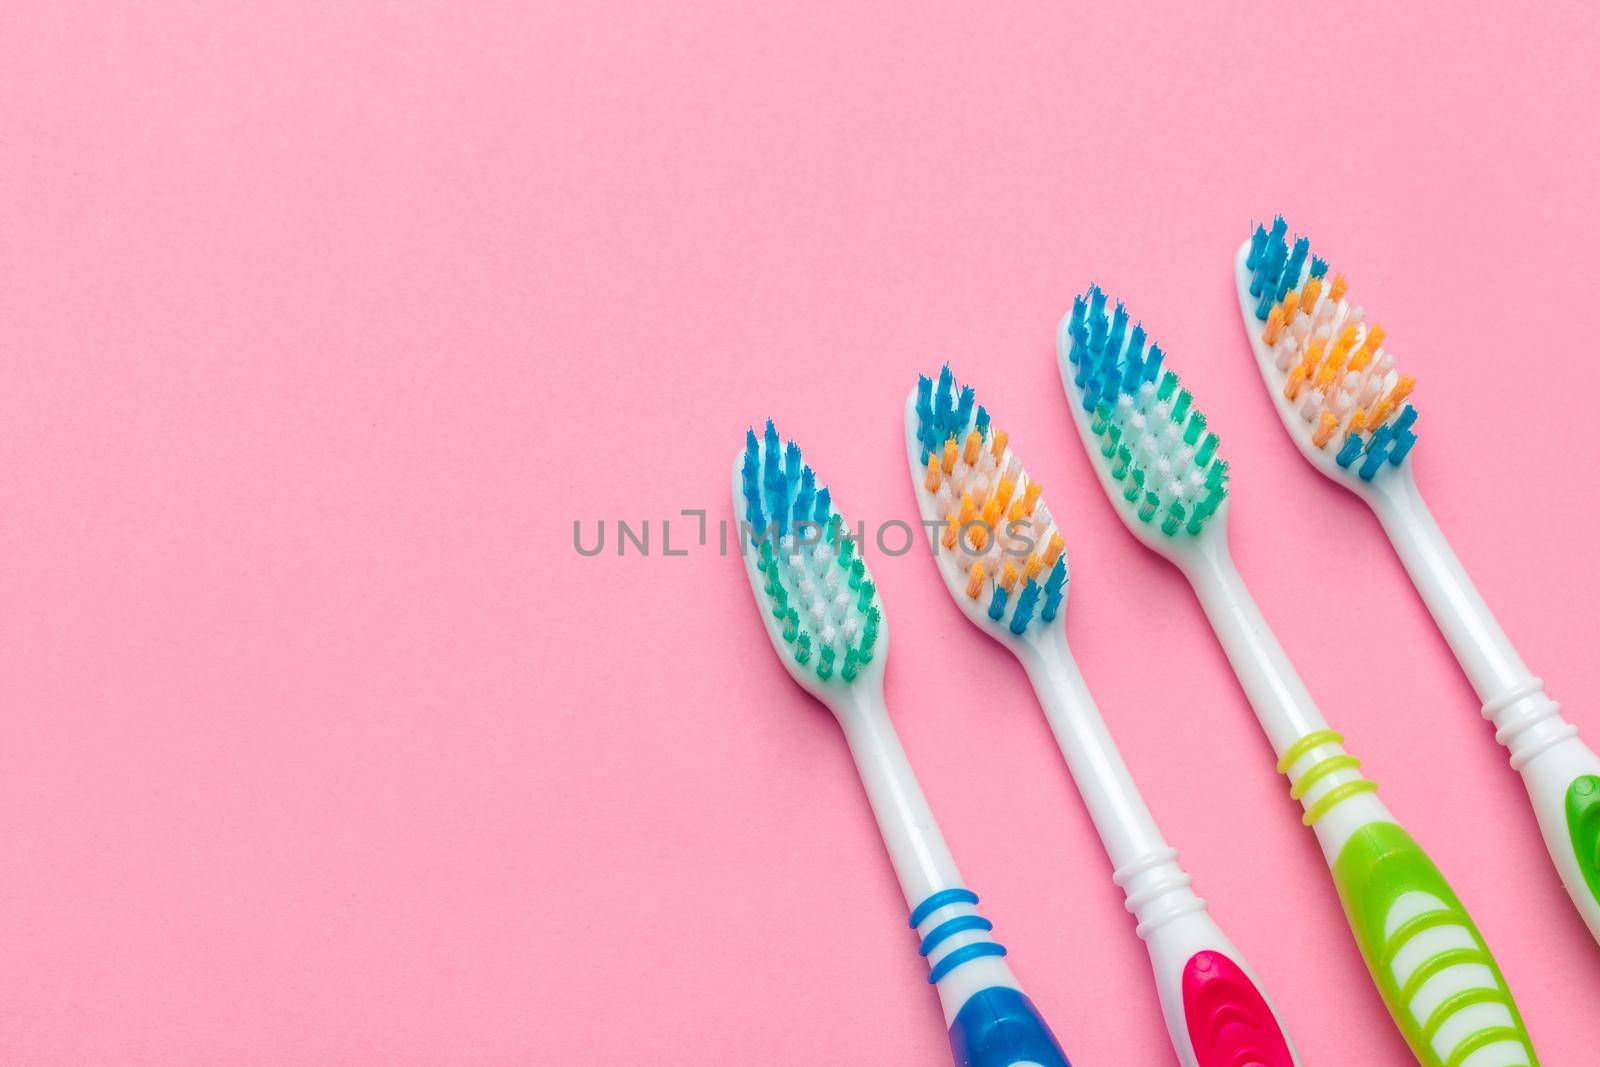 Toothbrushes on pink background. close up. creative photo. by Fabrikasimf